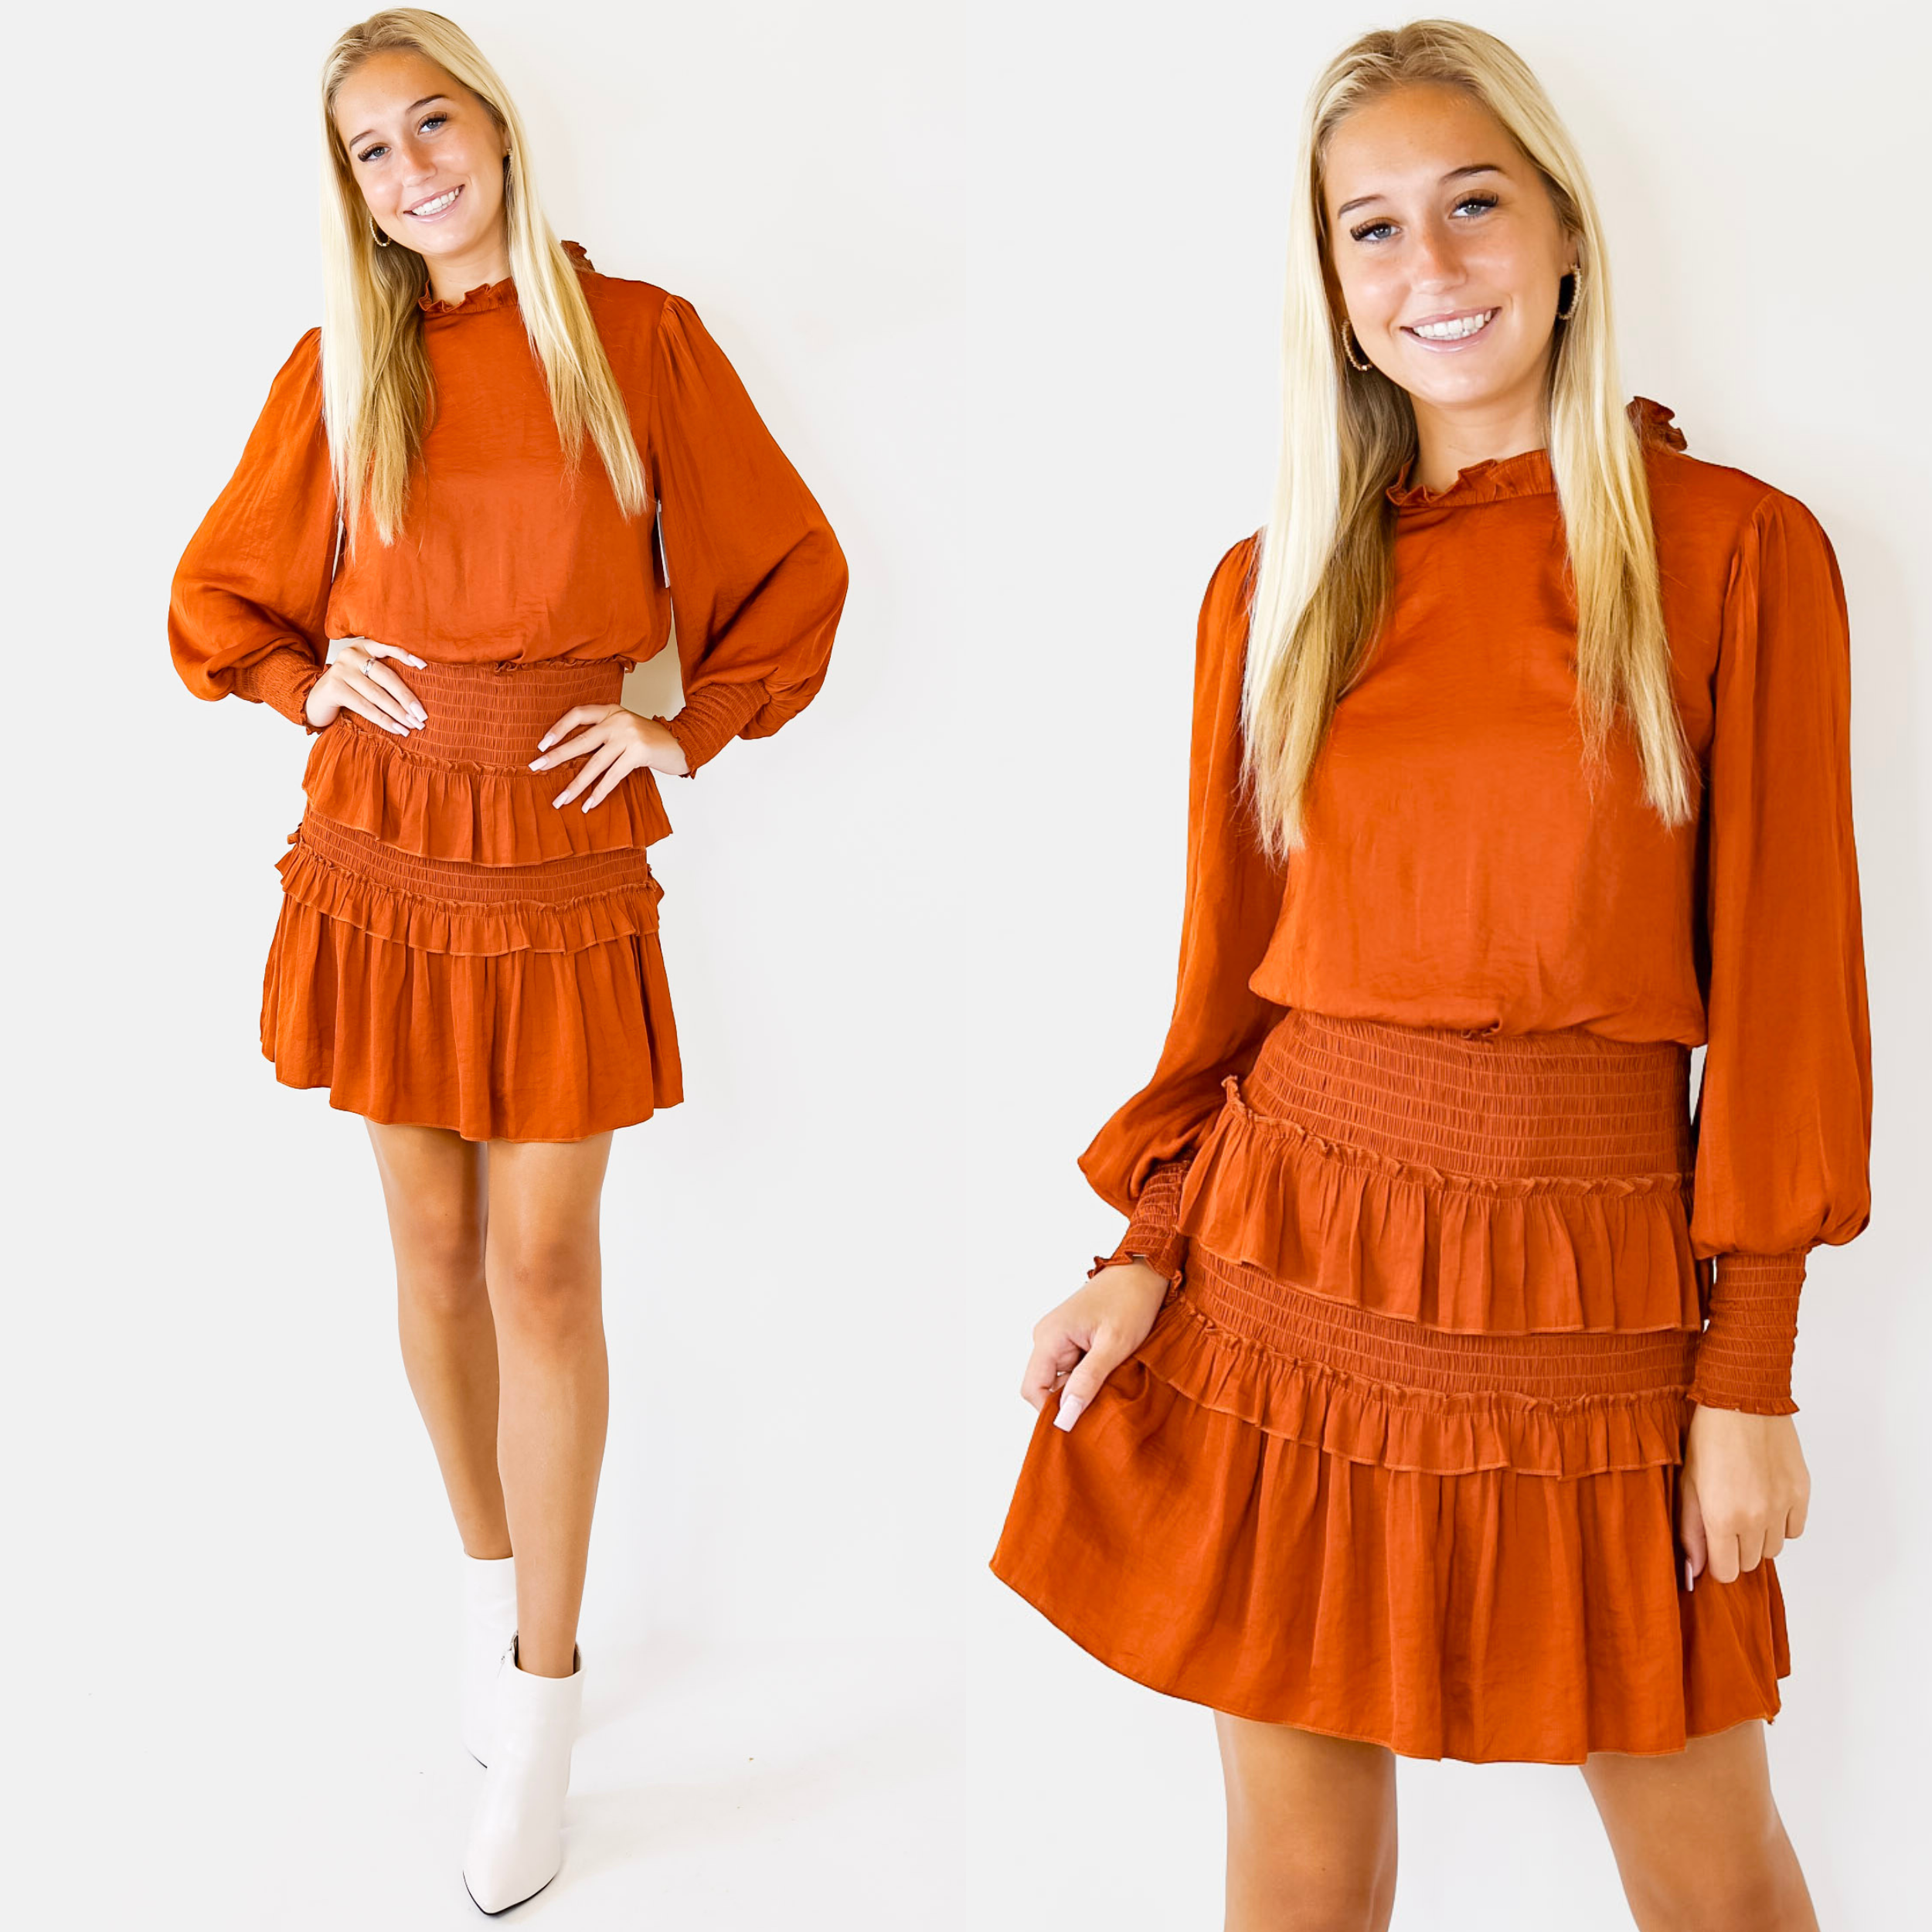 Model is wearing a short orange dress featuring long sleeves with cinched cuffs, ruffled neckline, and a tiered skirt with cinched panels